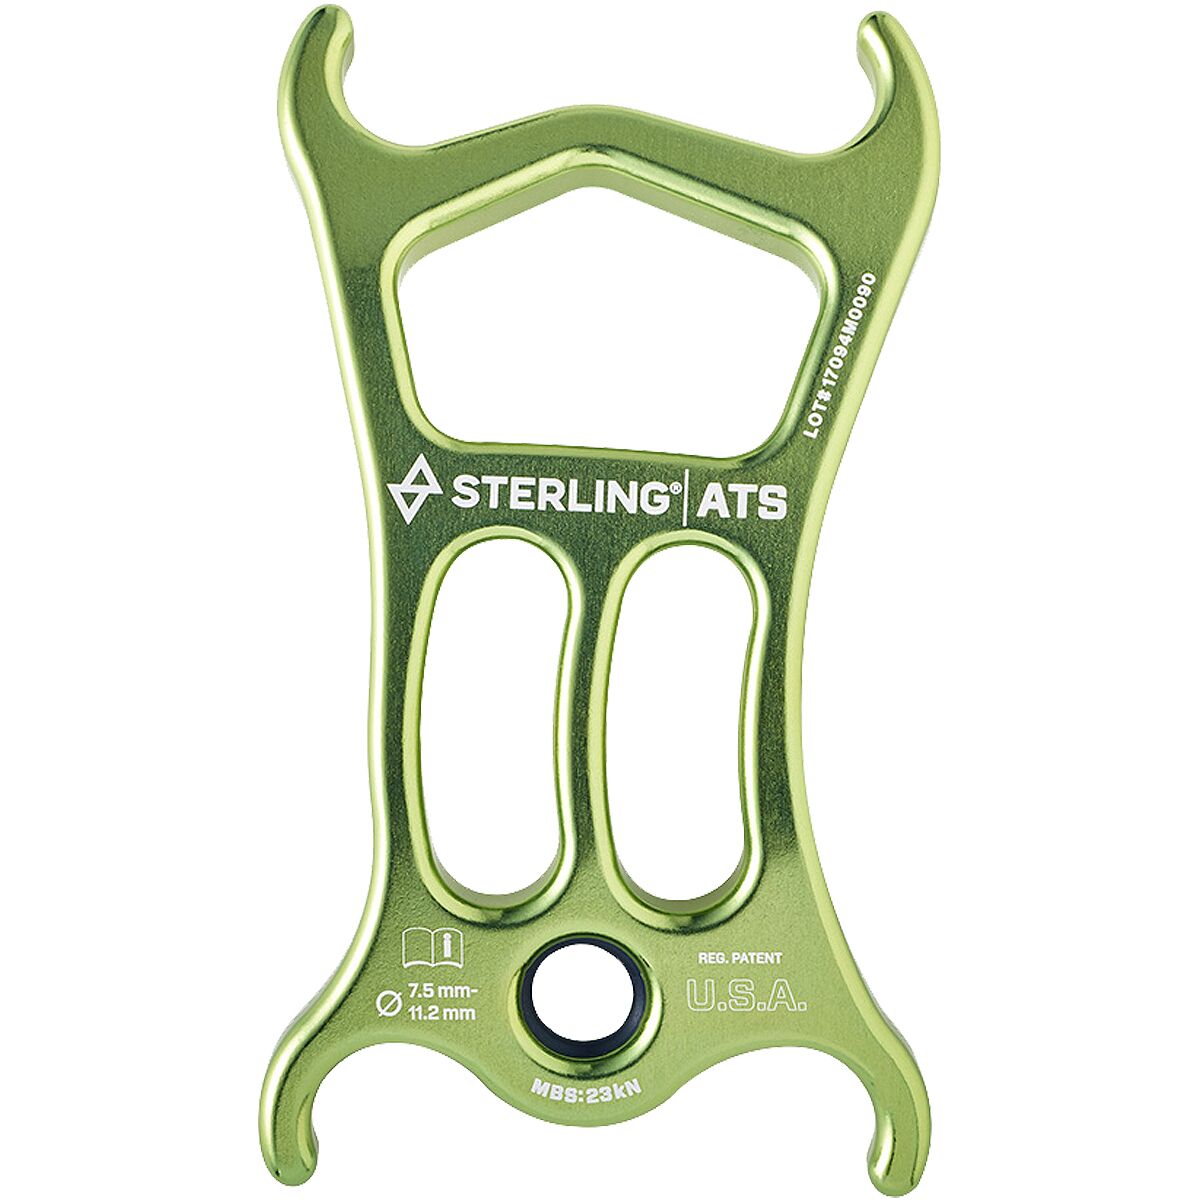 Sterling ATS Belay and Rappel Device